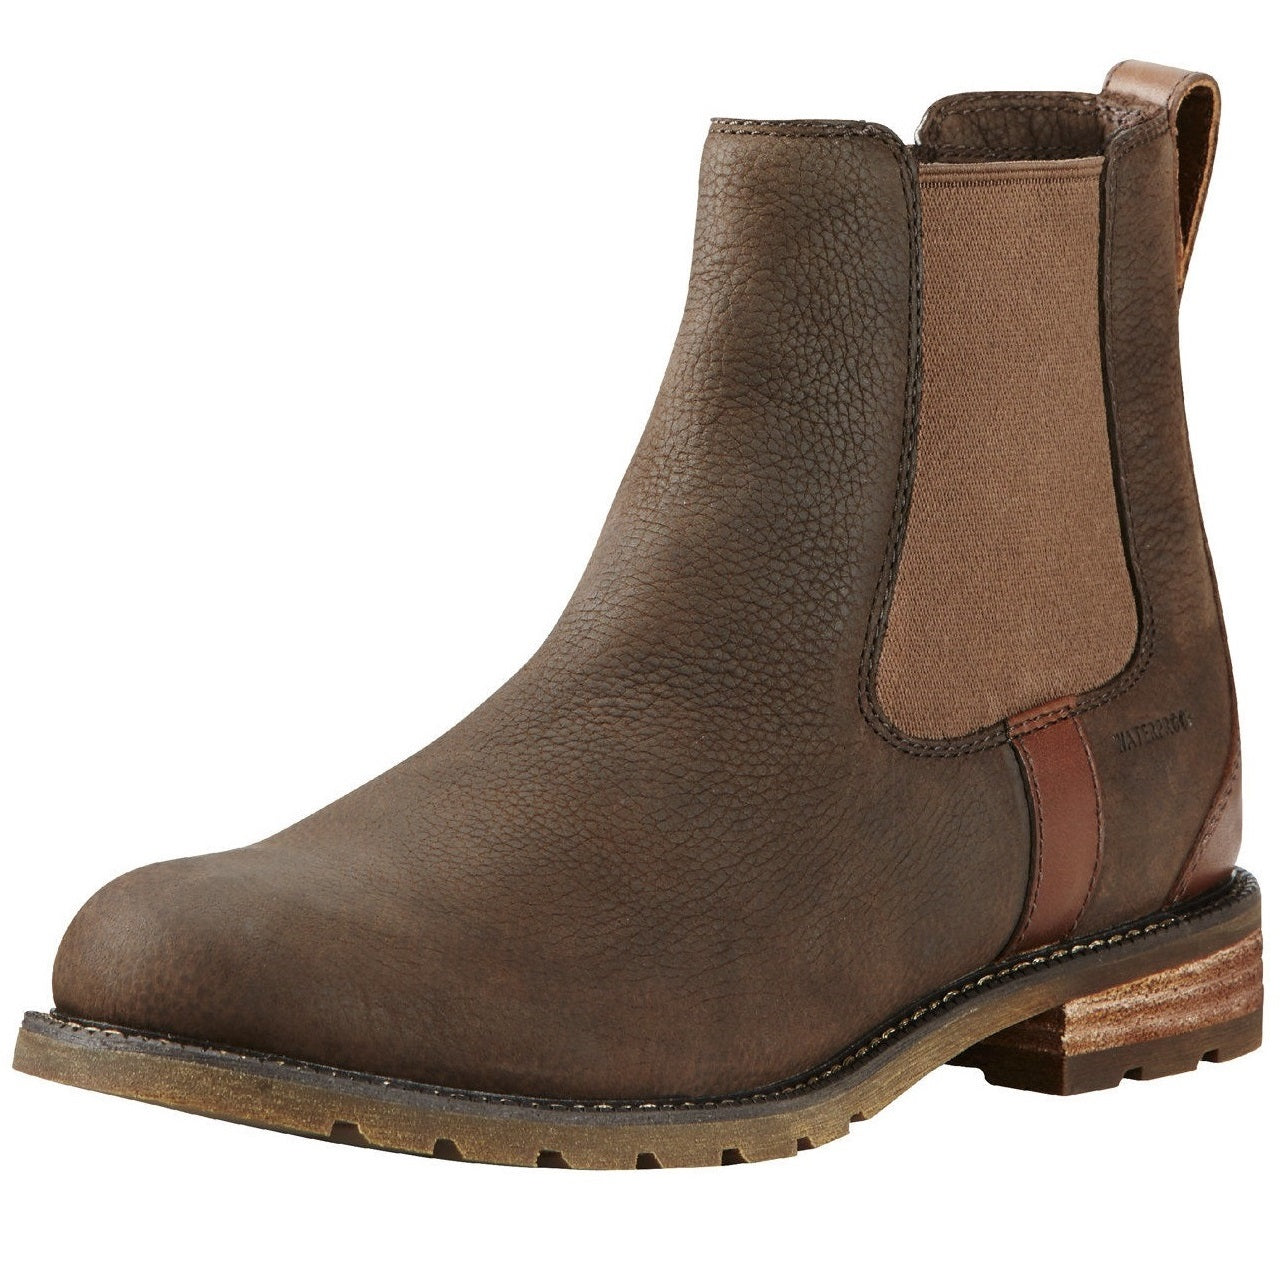 ARIAT Boots - Womens Wexford H2O Waterproof - Java